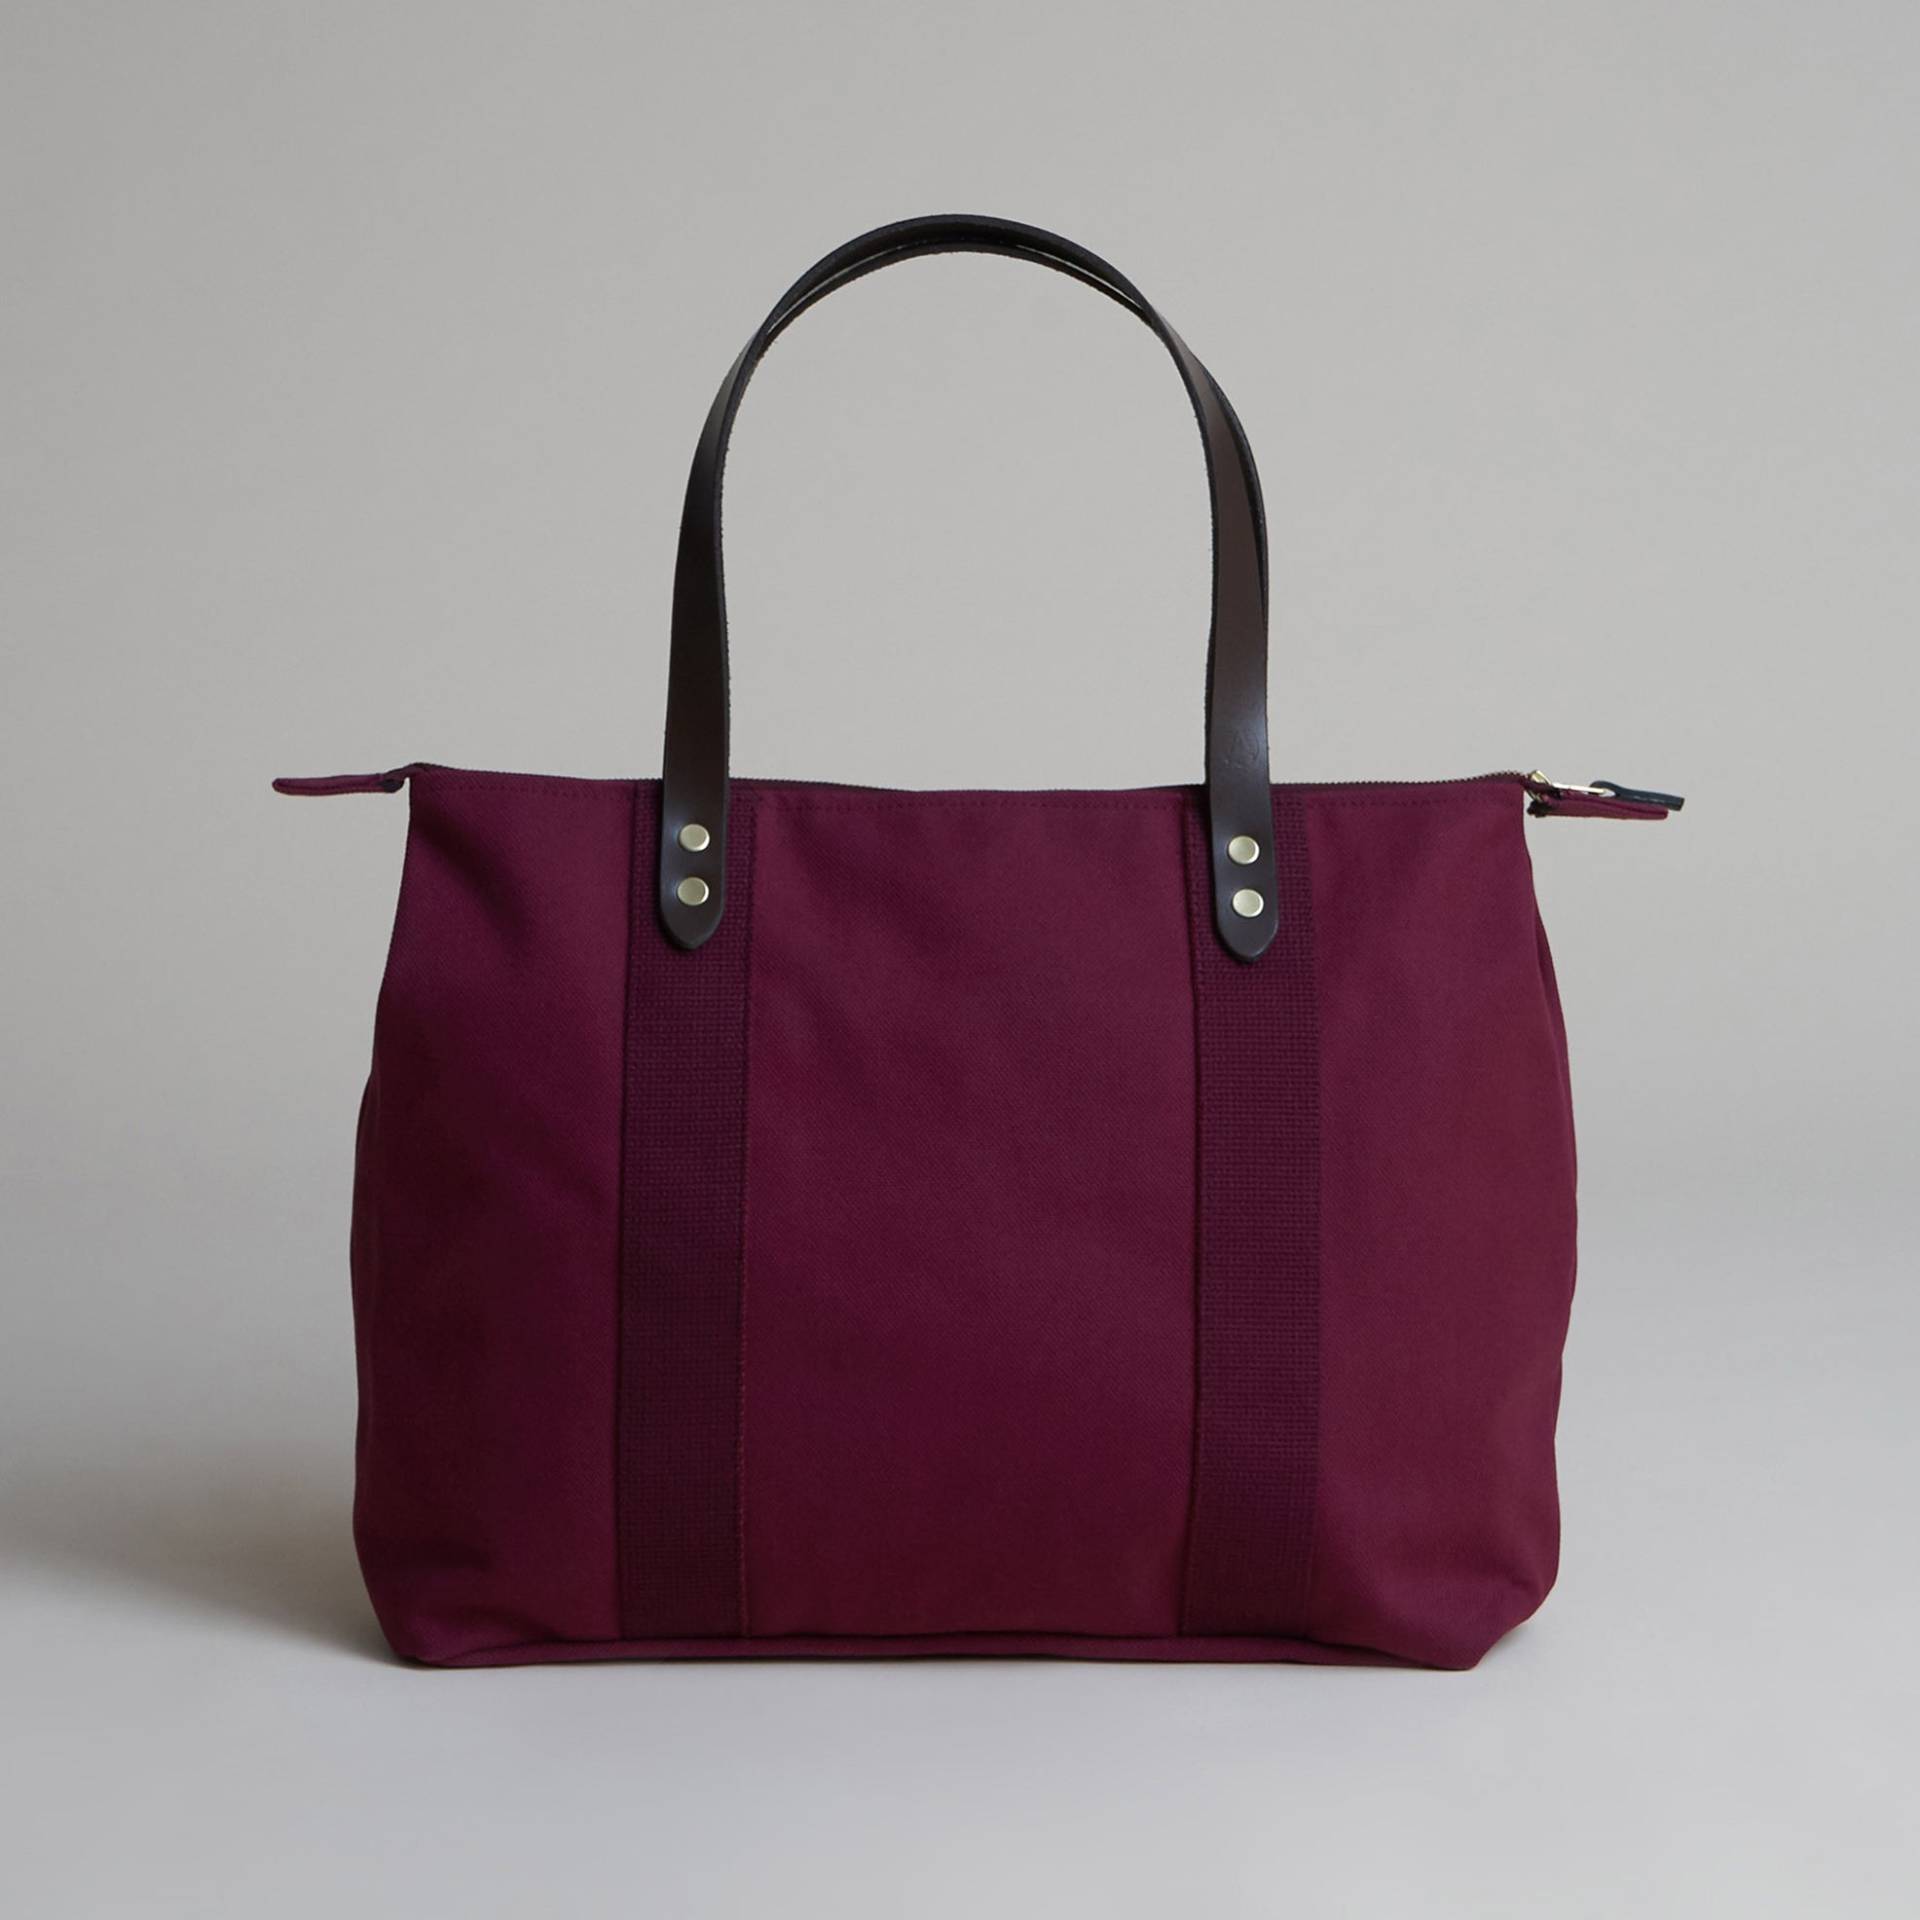 SOULEWAY - Canvas Tote Bag, Made in Germany, wasserabweisend, Bordeaux Rot von Souleway